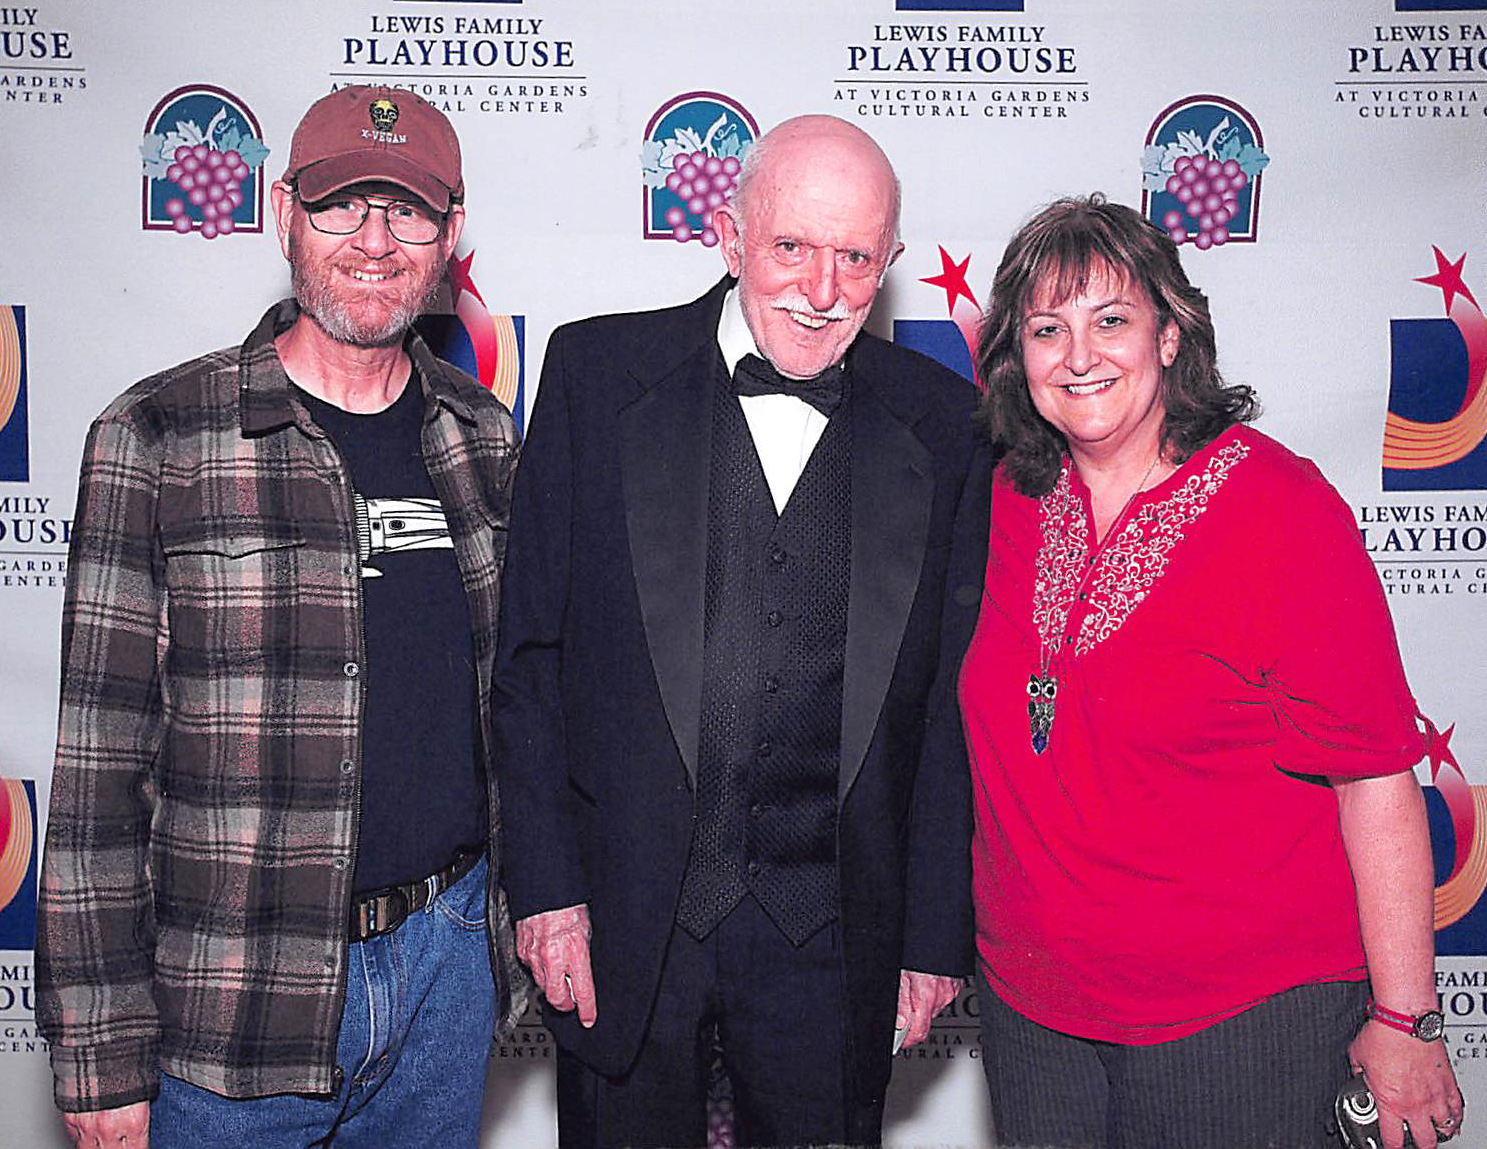 Gregory Schmauss pictured with John Astin and Karen Schmauss at the Lewis Family Playhouse in Rancho Cucamonga, California.